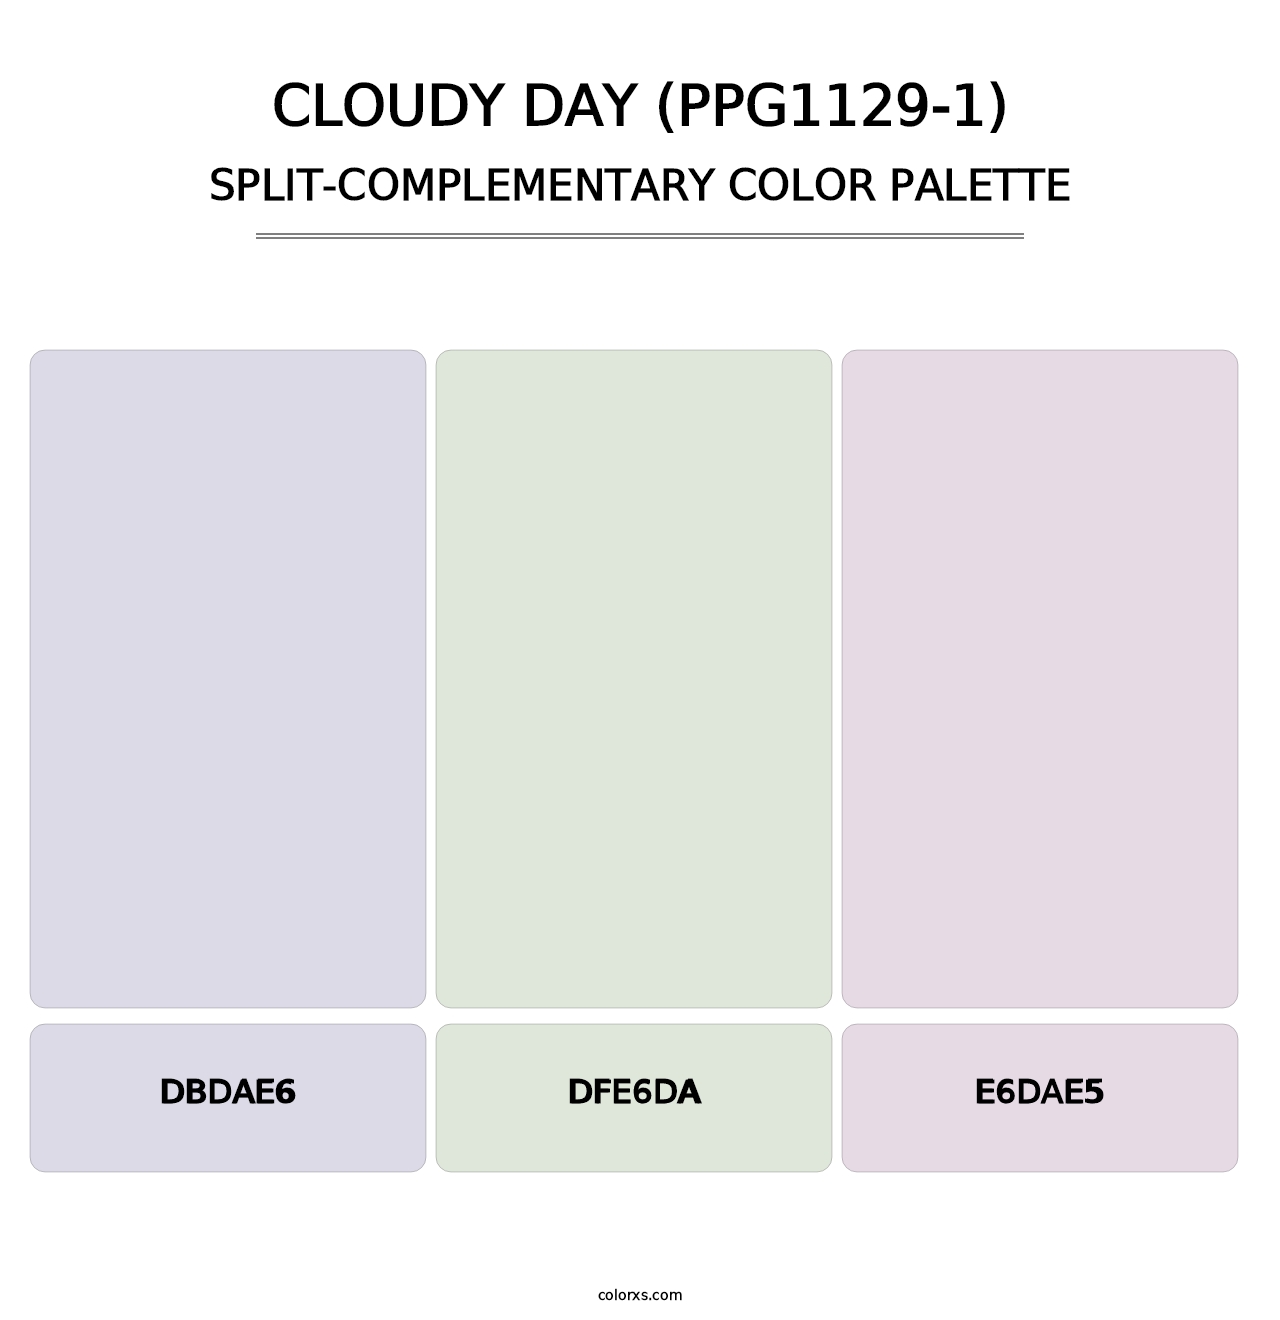 Cloudy Day (PPG1129-1) - Split-Complementary Color Palette